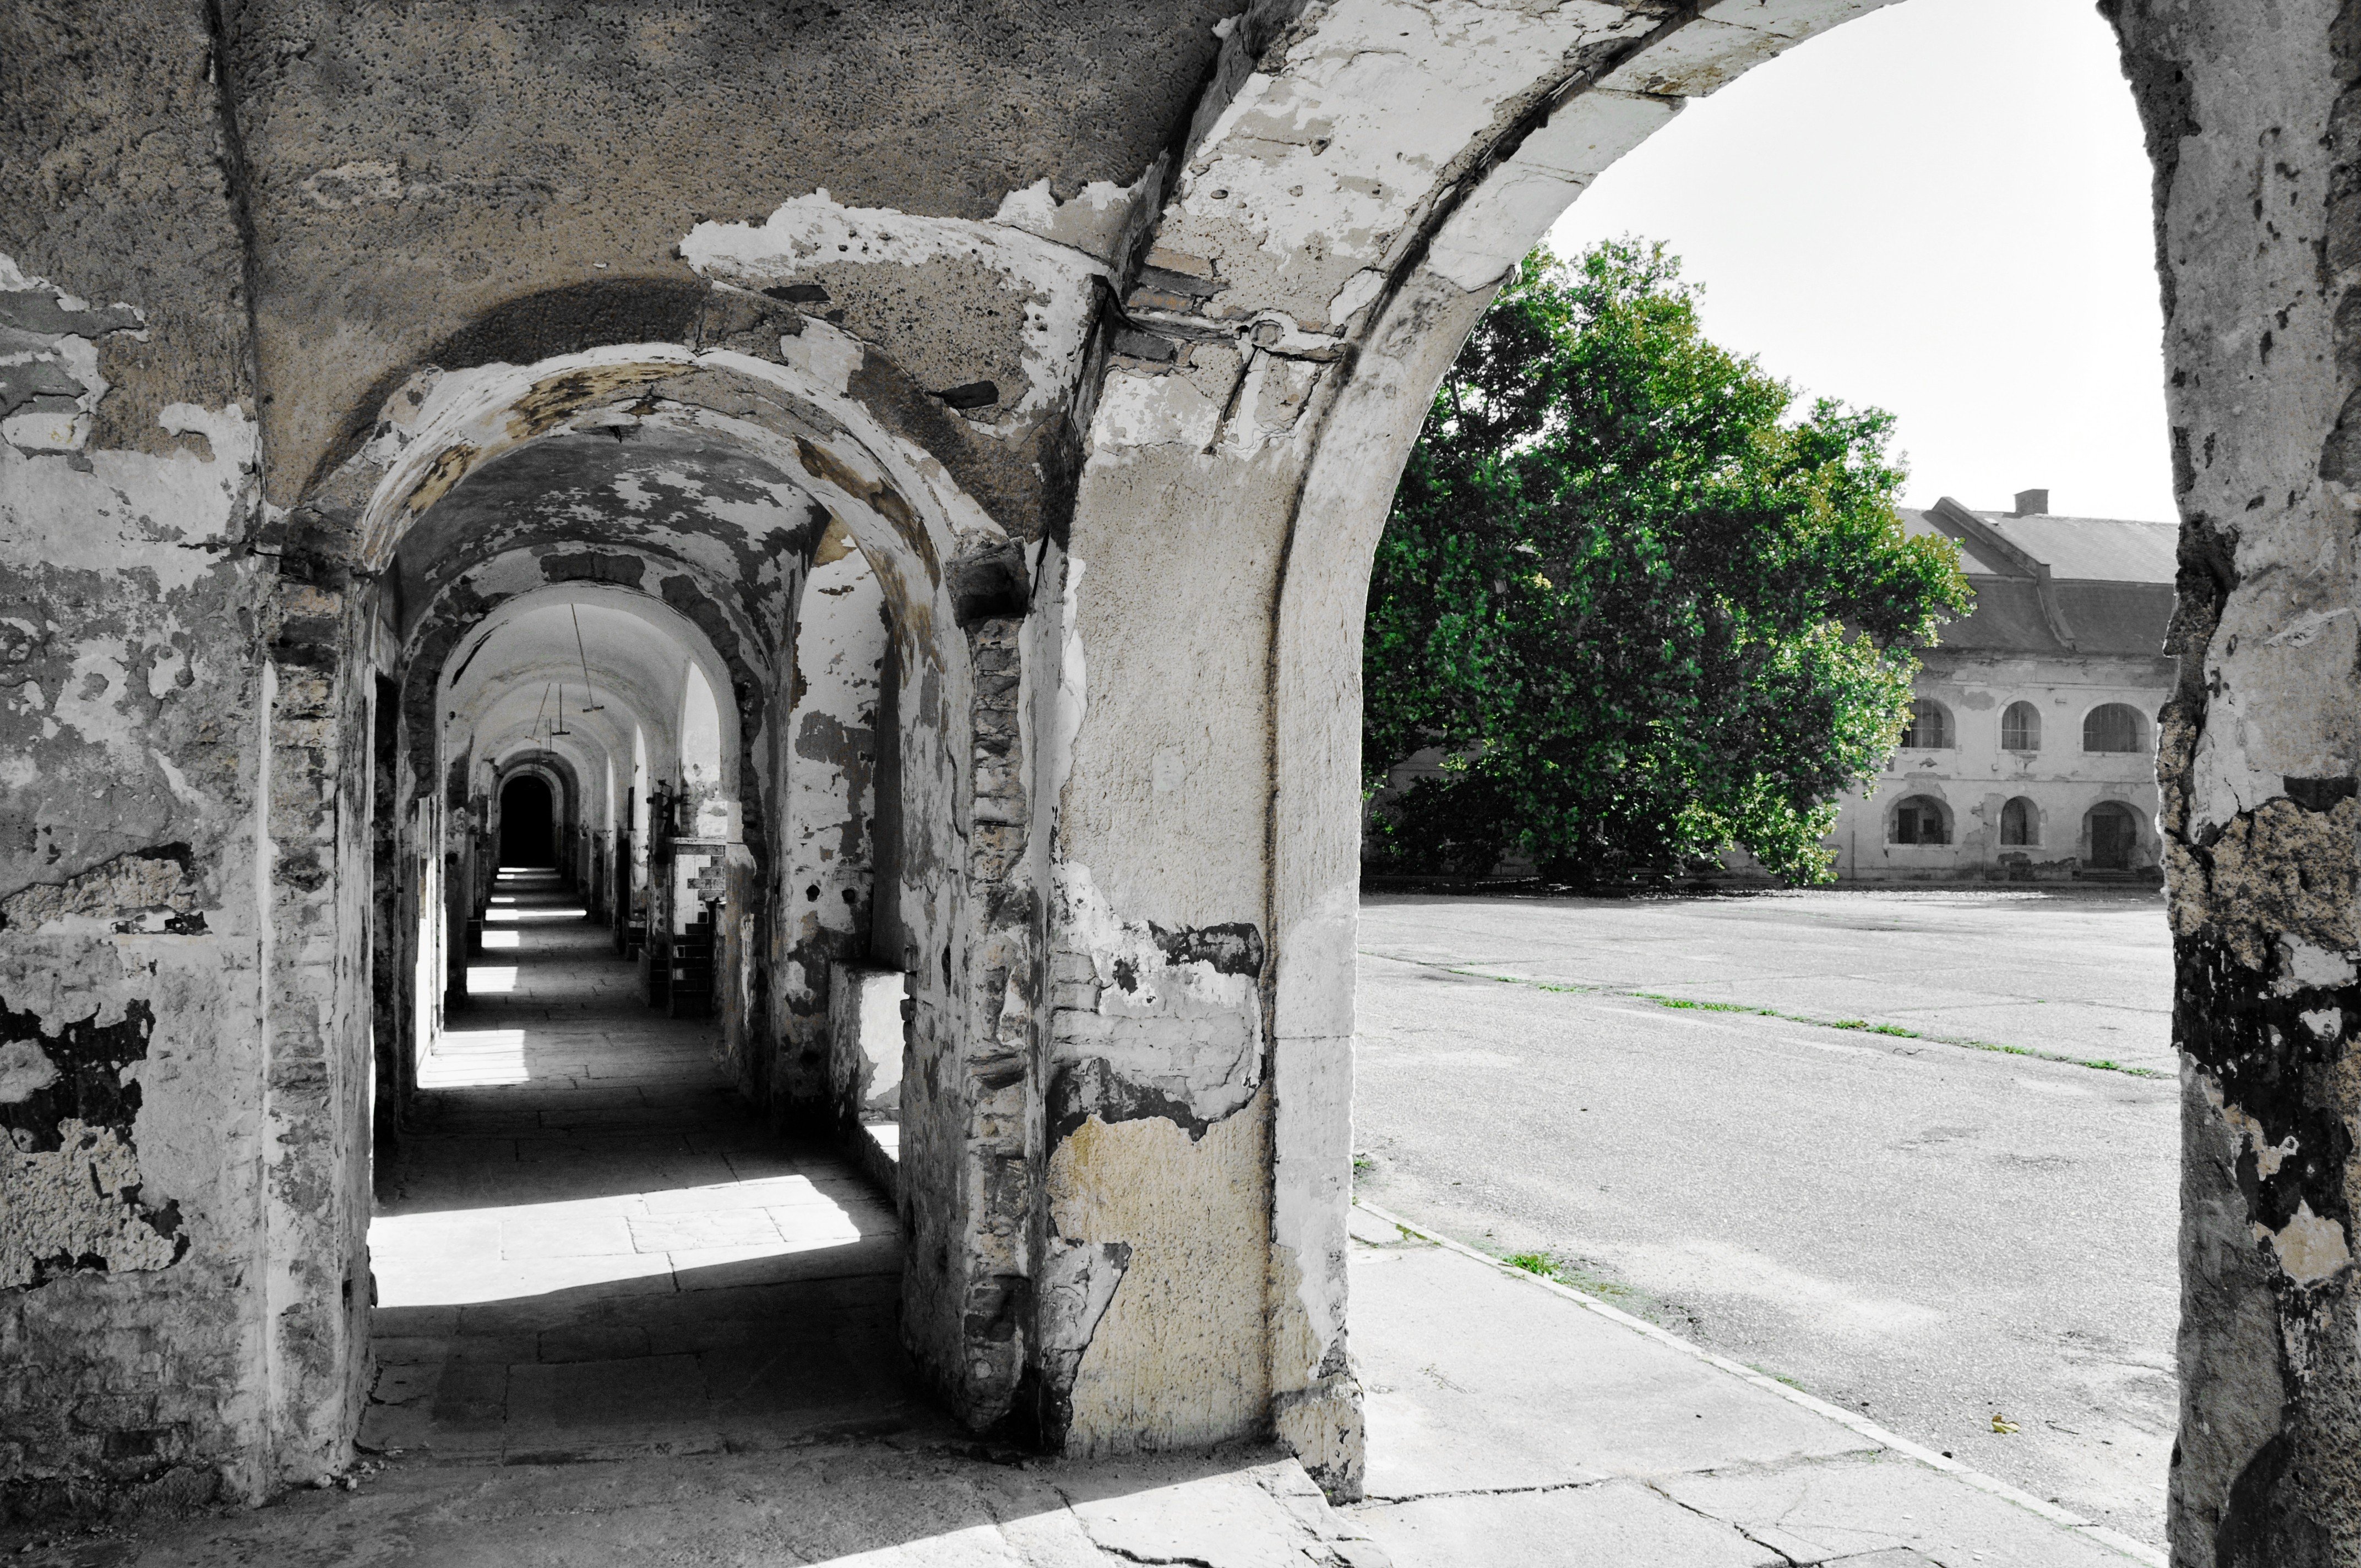 architecture, Old building, Ruin, Abandoned, Slovakia, History, Arch, Trees, Sunlight, Shadow, Monastery, Town square, Selective coloring Wallpaper